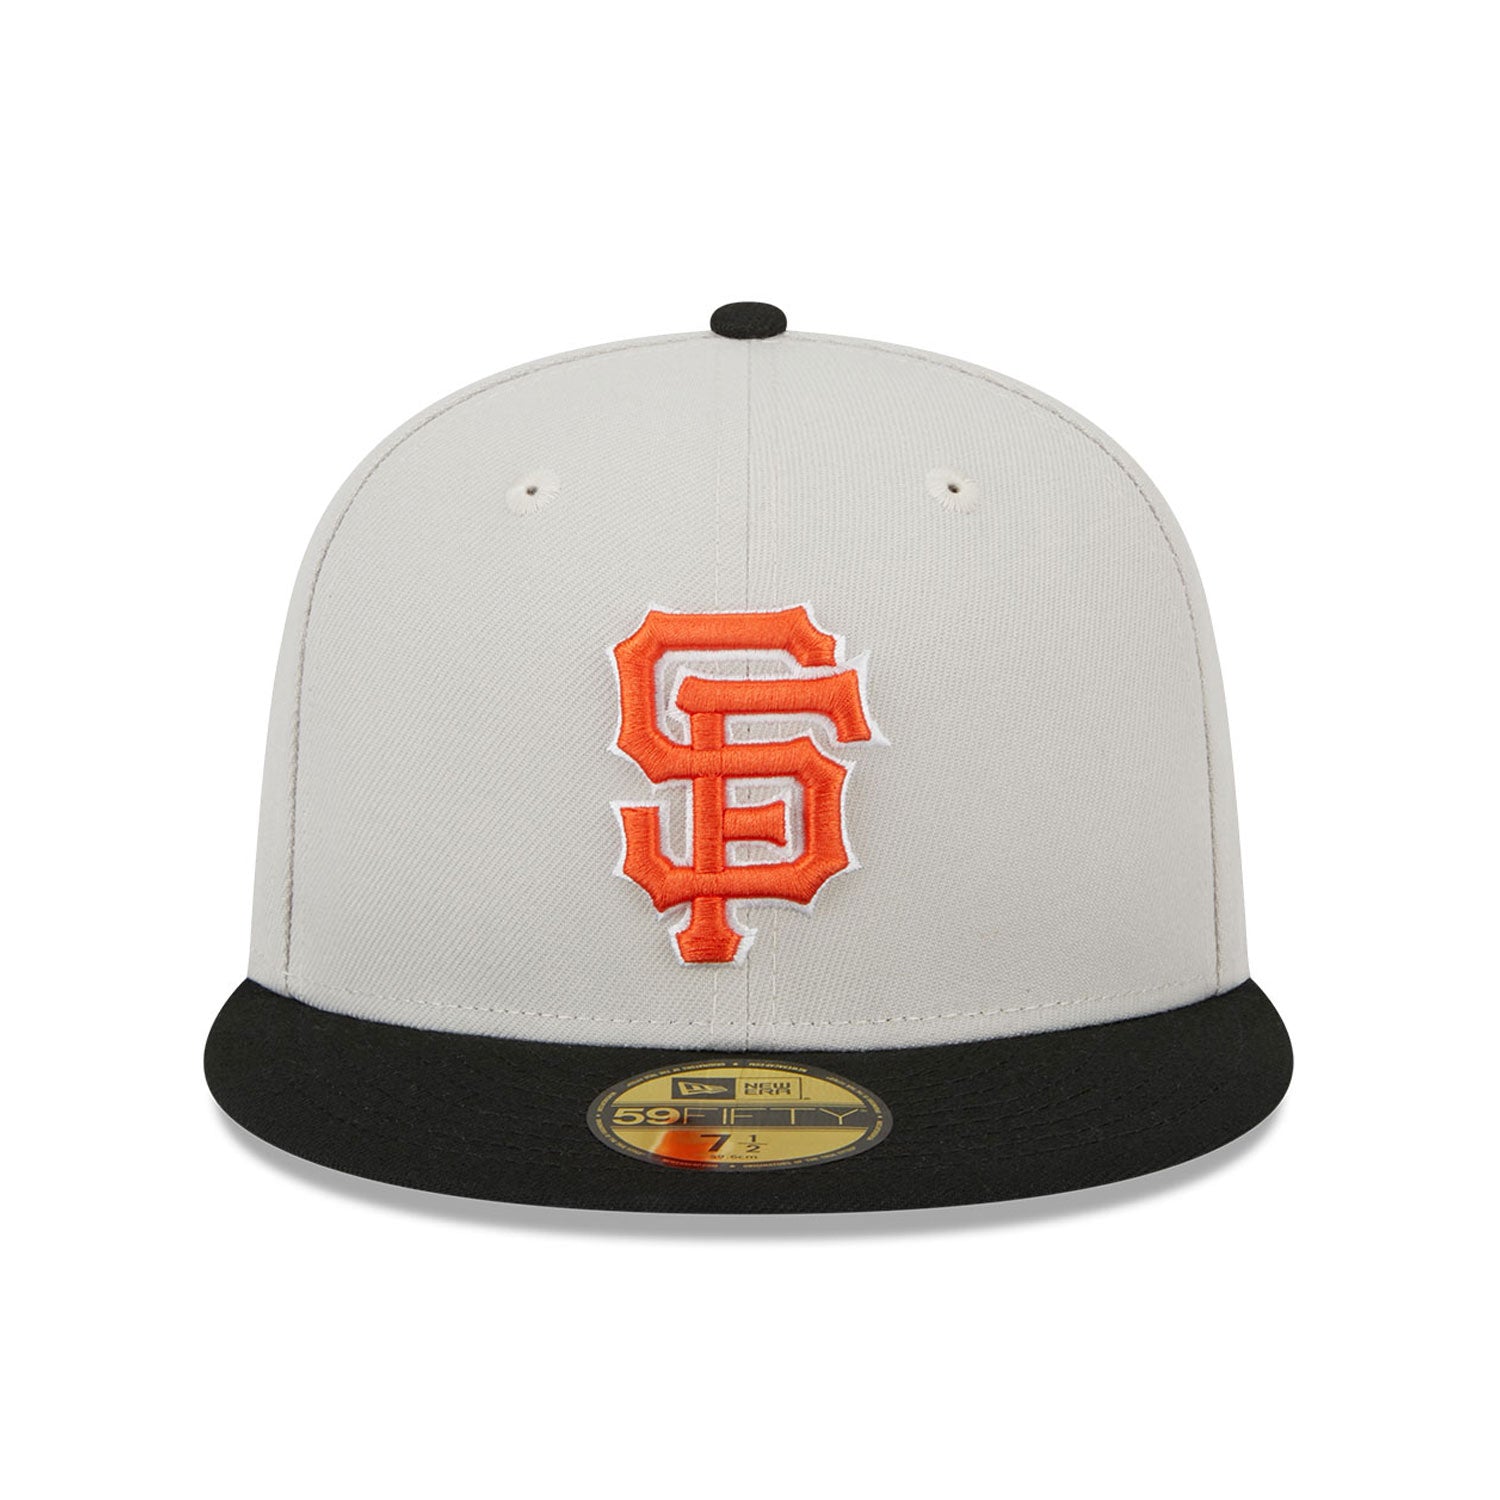 New Era San Francisco Giants Varsity Letter Stone 59FIFTY Fitted Cap